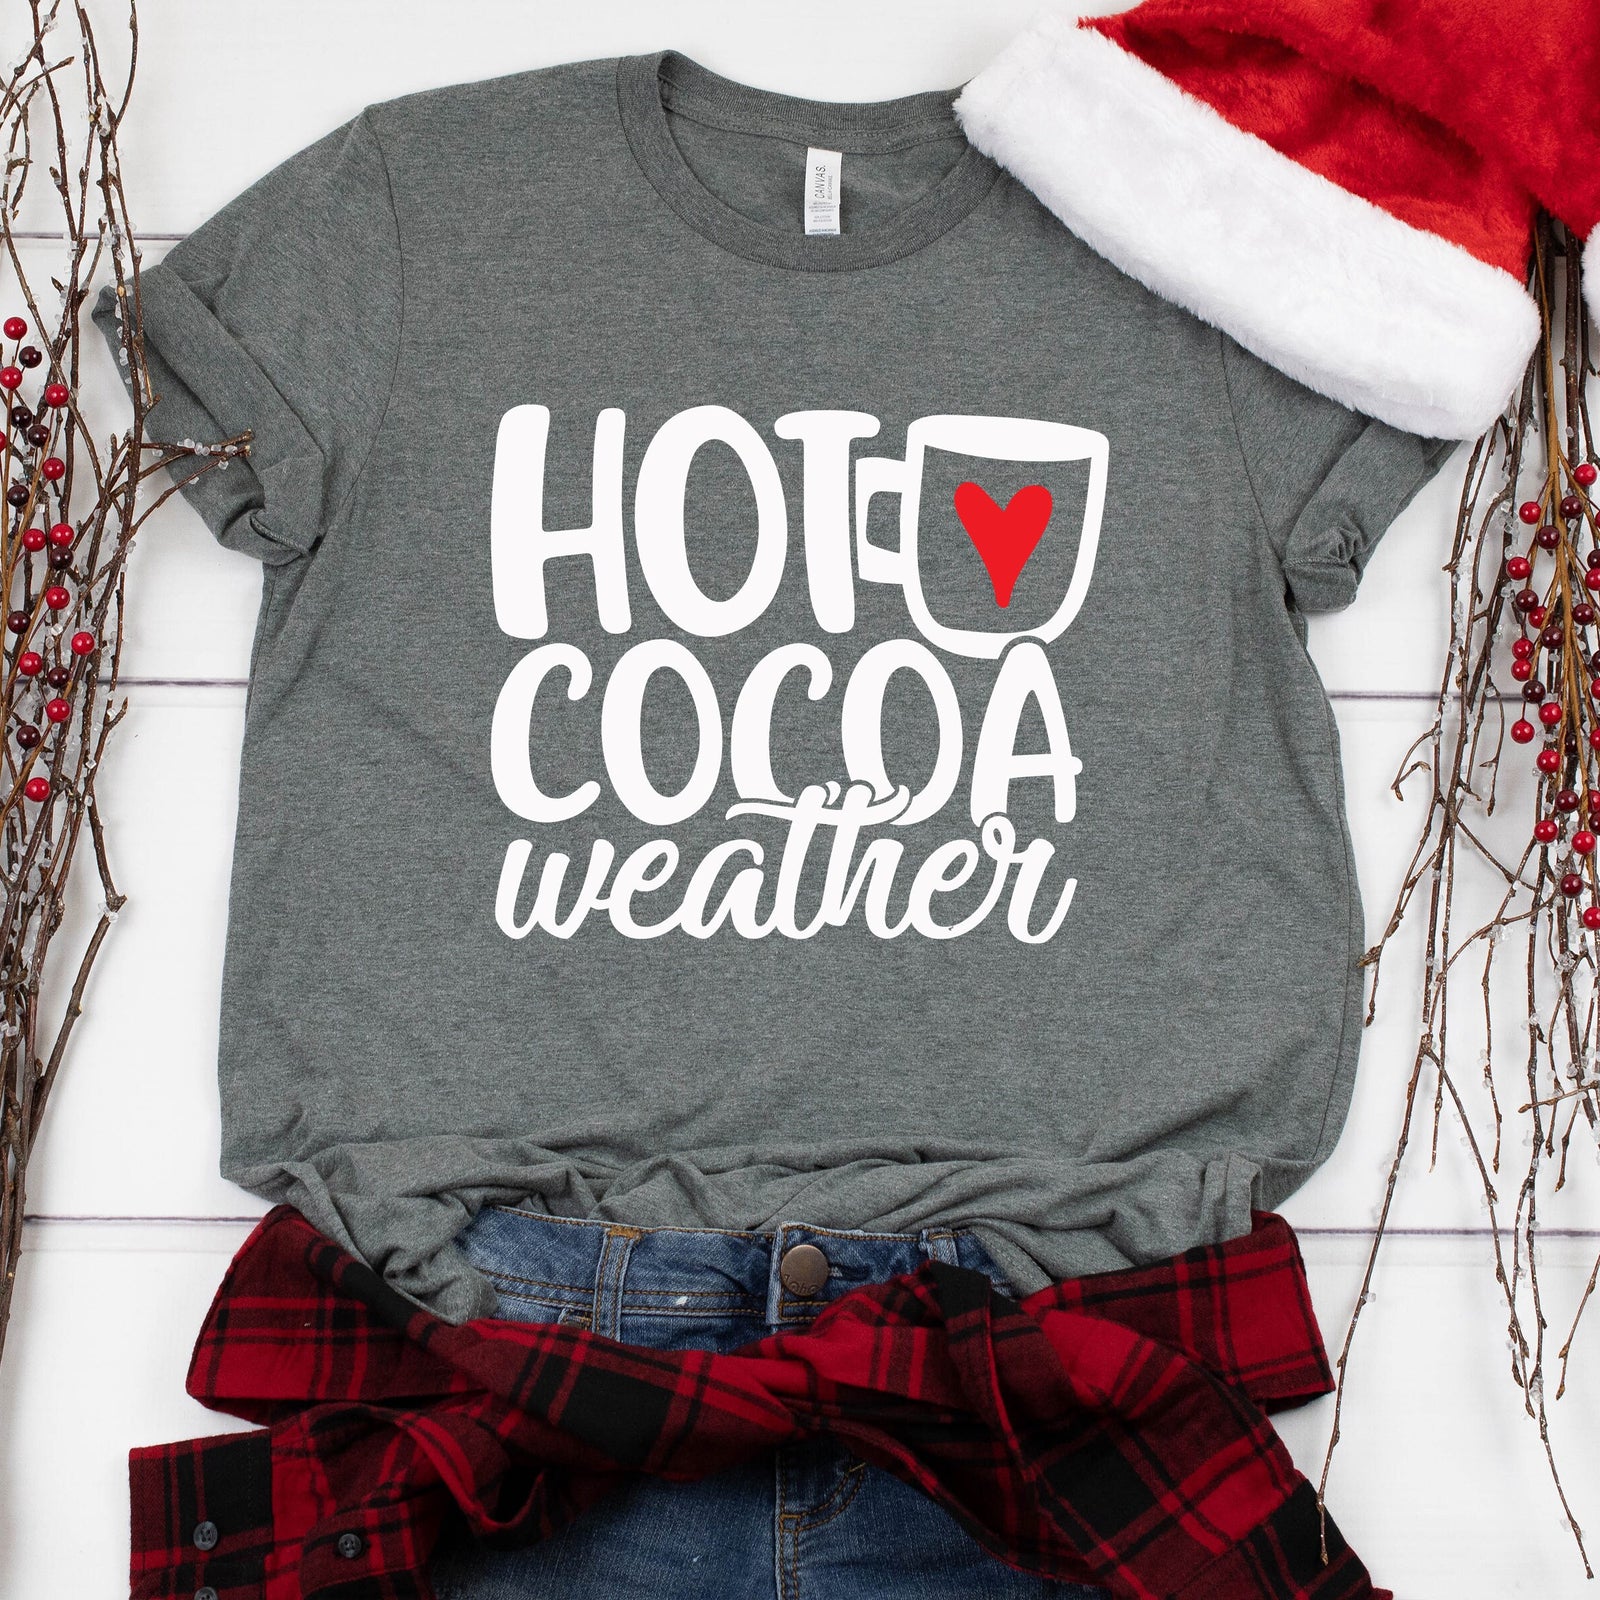 Hot Cocoa Weather Christmas T Shirt - Hot Chocolate Heart Cute Christmas Shirt - Holiday Weather Christmas Shirt - Christmas Matching Shirt